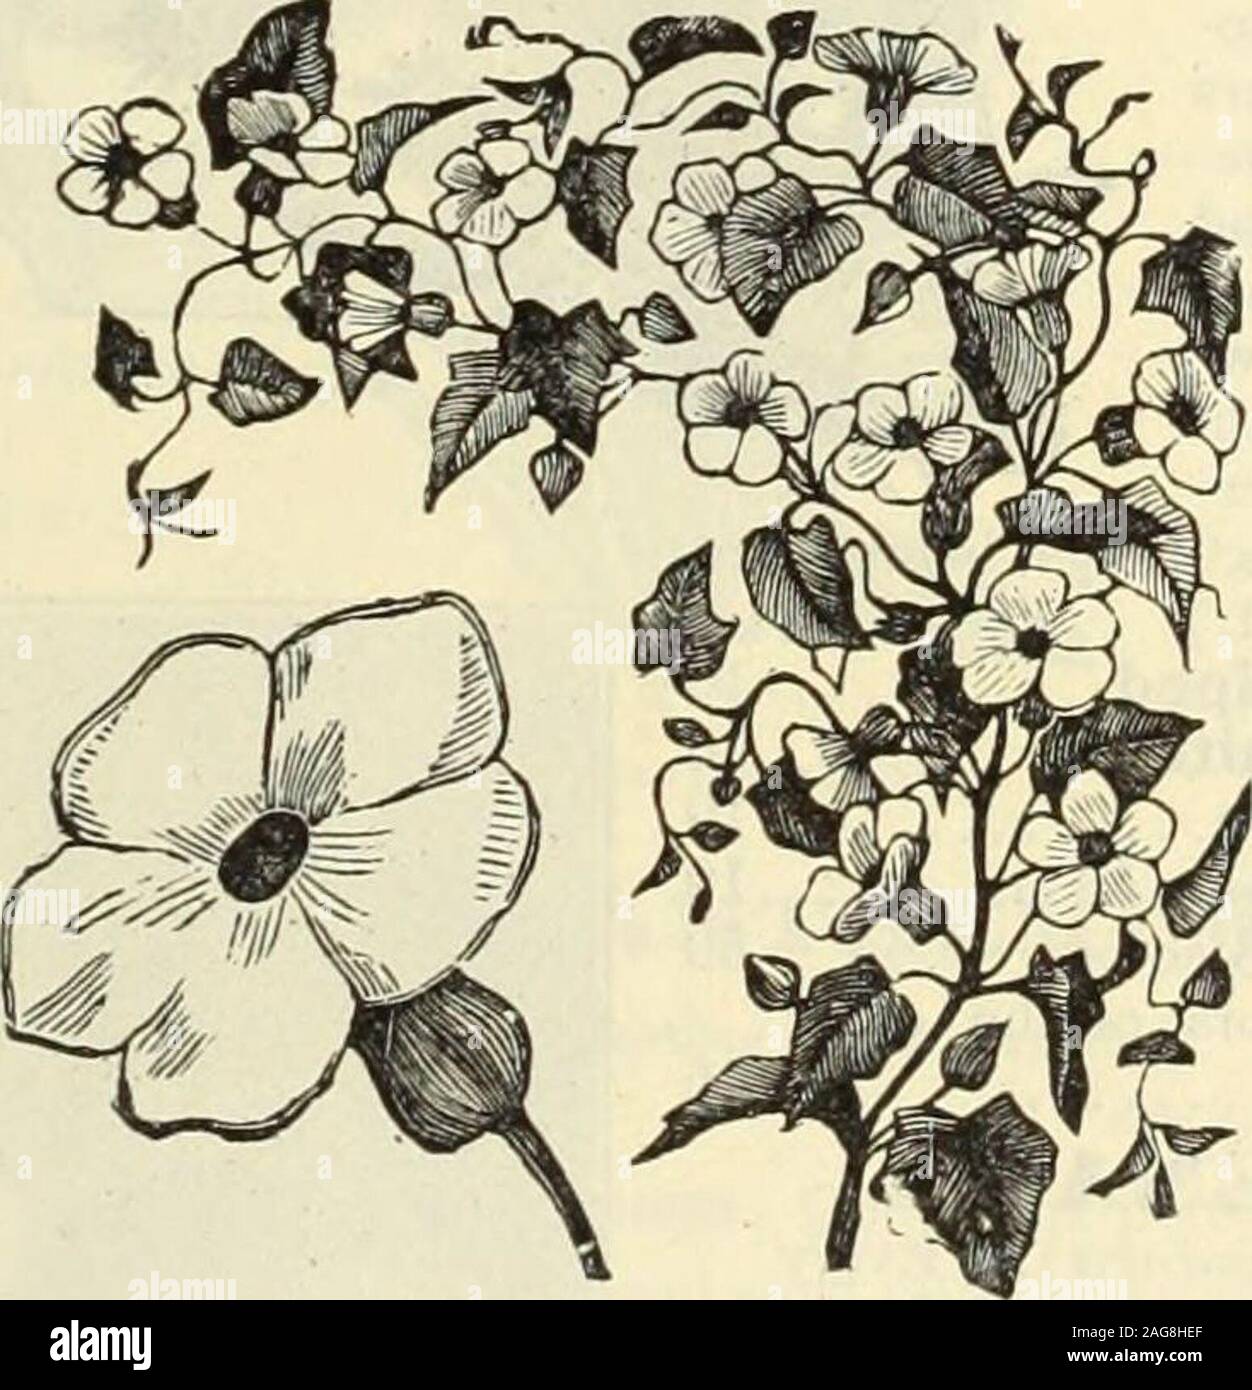 . Dreer's 1913 garden book. der plant. (See cut.)J oz., 25 cts 5 THAEICTRUM (Meadow Rue). 43u6 Aquilegifolium. Favoritehardy perennial, with gracefulfoliage and masses of rosy-purpleflowers; 3 feet 15 THUNBERGIA. (Black-eyed Susan.) 4310 Beautiful, rapid-growing annual climbers, preferring a warm,sunny Thunbergia.situation; used extensively in hanging-baskets, vases,low fences,etc.; very pretty flowers in buff, white, orange, etc., with darkeyes; mixed colors; 4 feet. (See cut.) J oz., 25 cts 5 TRITOMA. (Red-hot Poker, Flame Flower, or Torch Lily.)4330 Hybrida. The introduction of new, early a Stock Photo